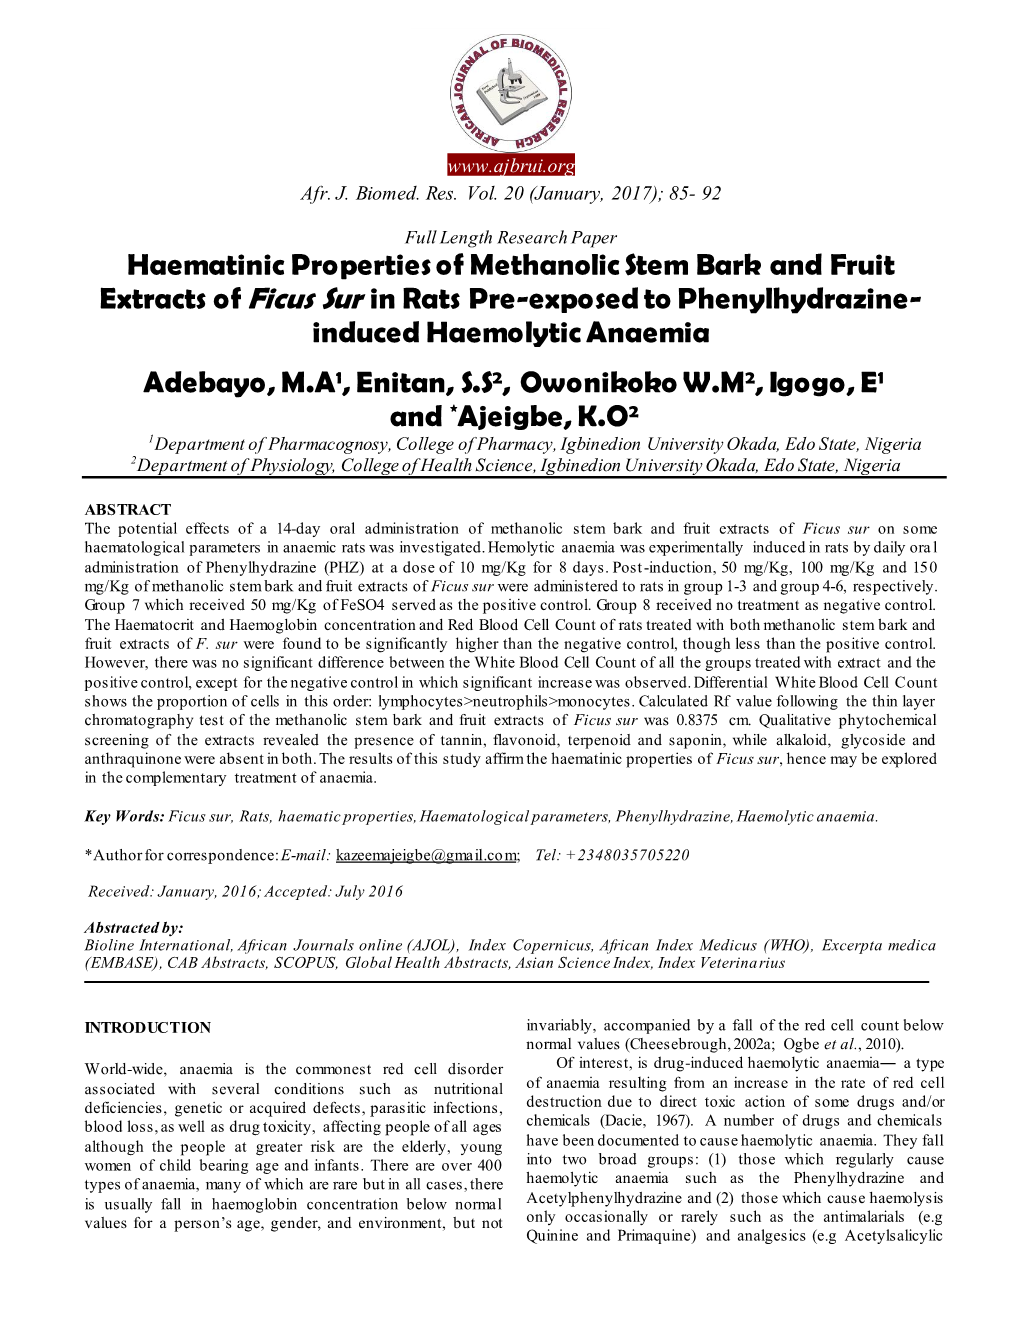 Haematinic Properties of Methanolic Stem Bark and Fruit Extracts of Ficus Sur in Rats Pre-Exposed to Phenylhydrazine- Induced Haemolytic Anaemia